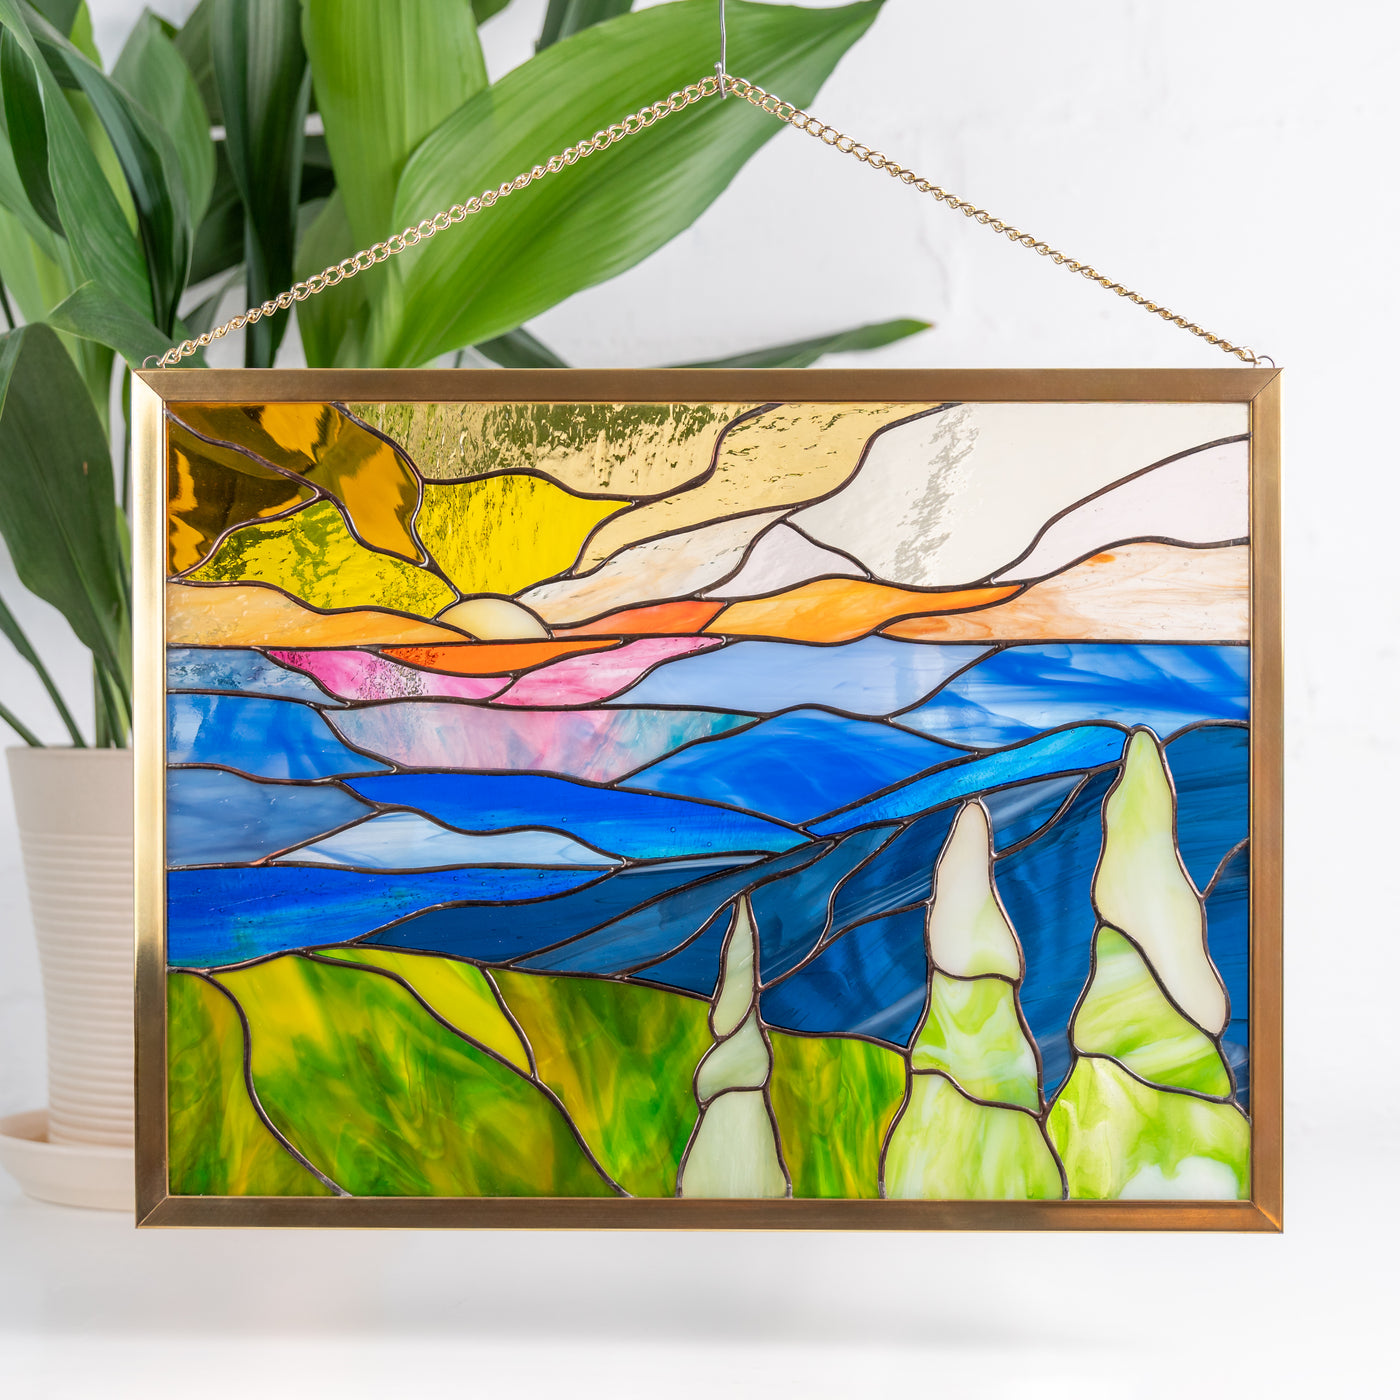 Blue Ridge Mountains stained glass window hanging